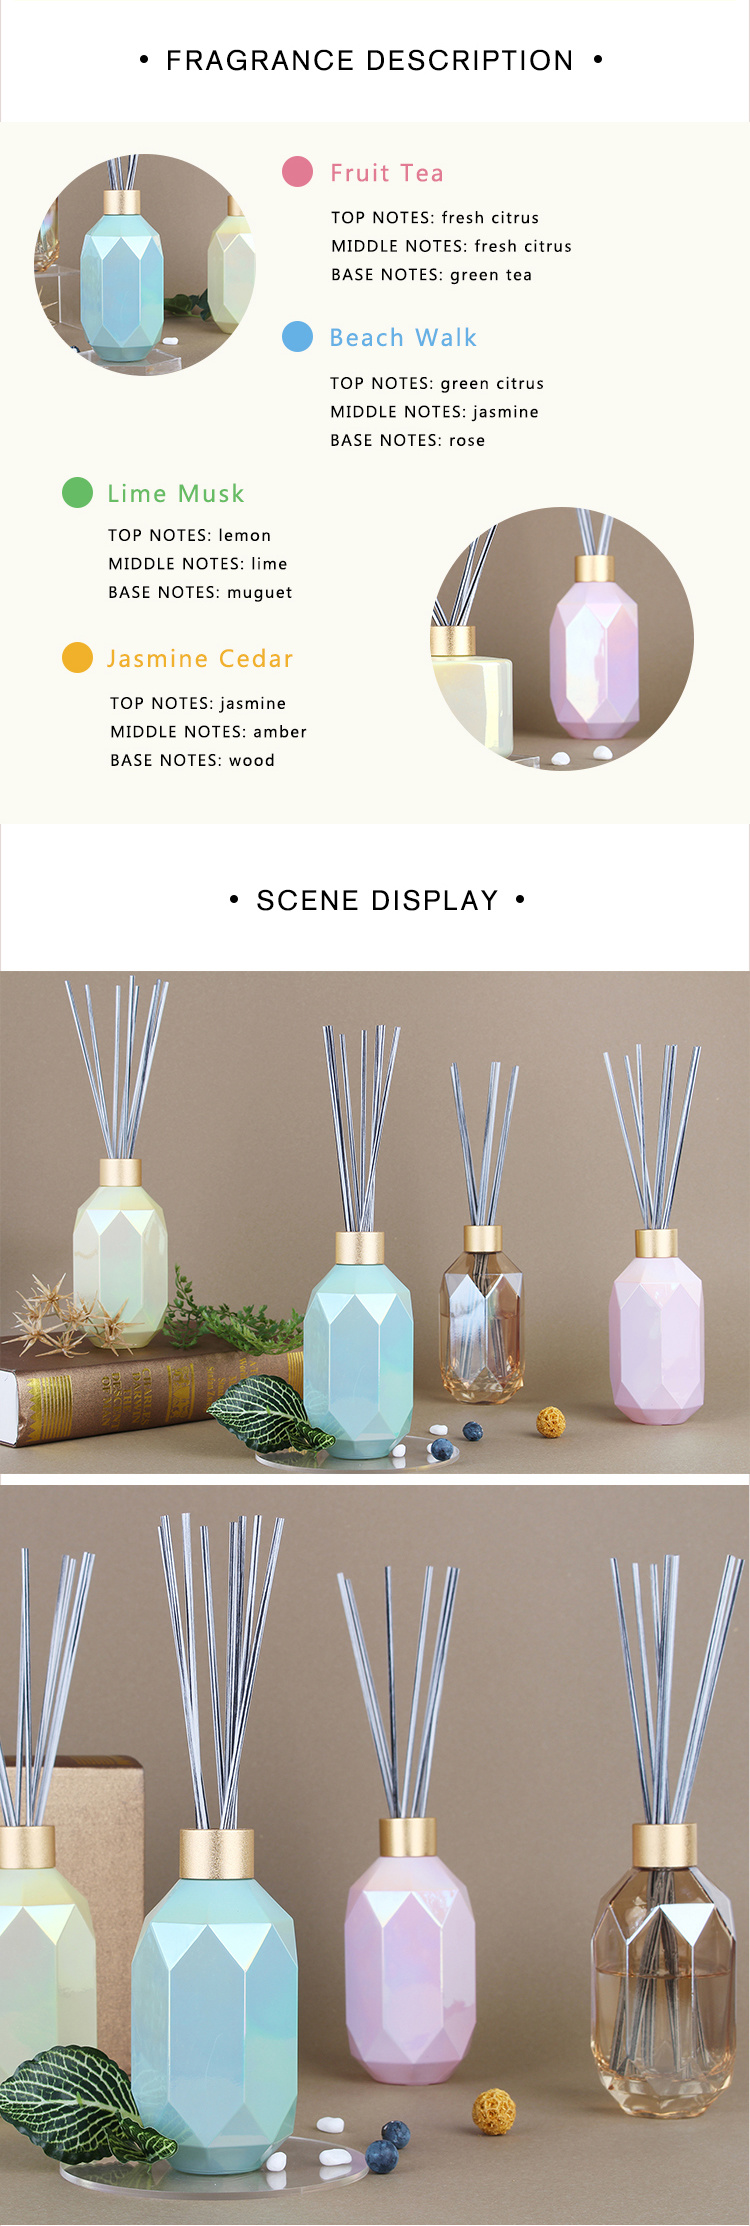 Wholesale Aroma Diffuser 180ml Color Bottle with Fiber Stick Birthday Gift